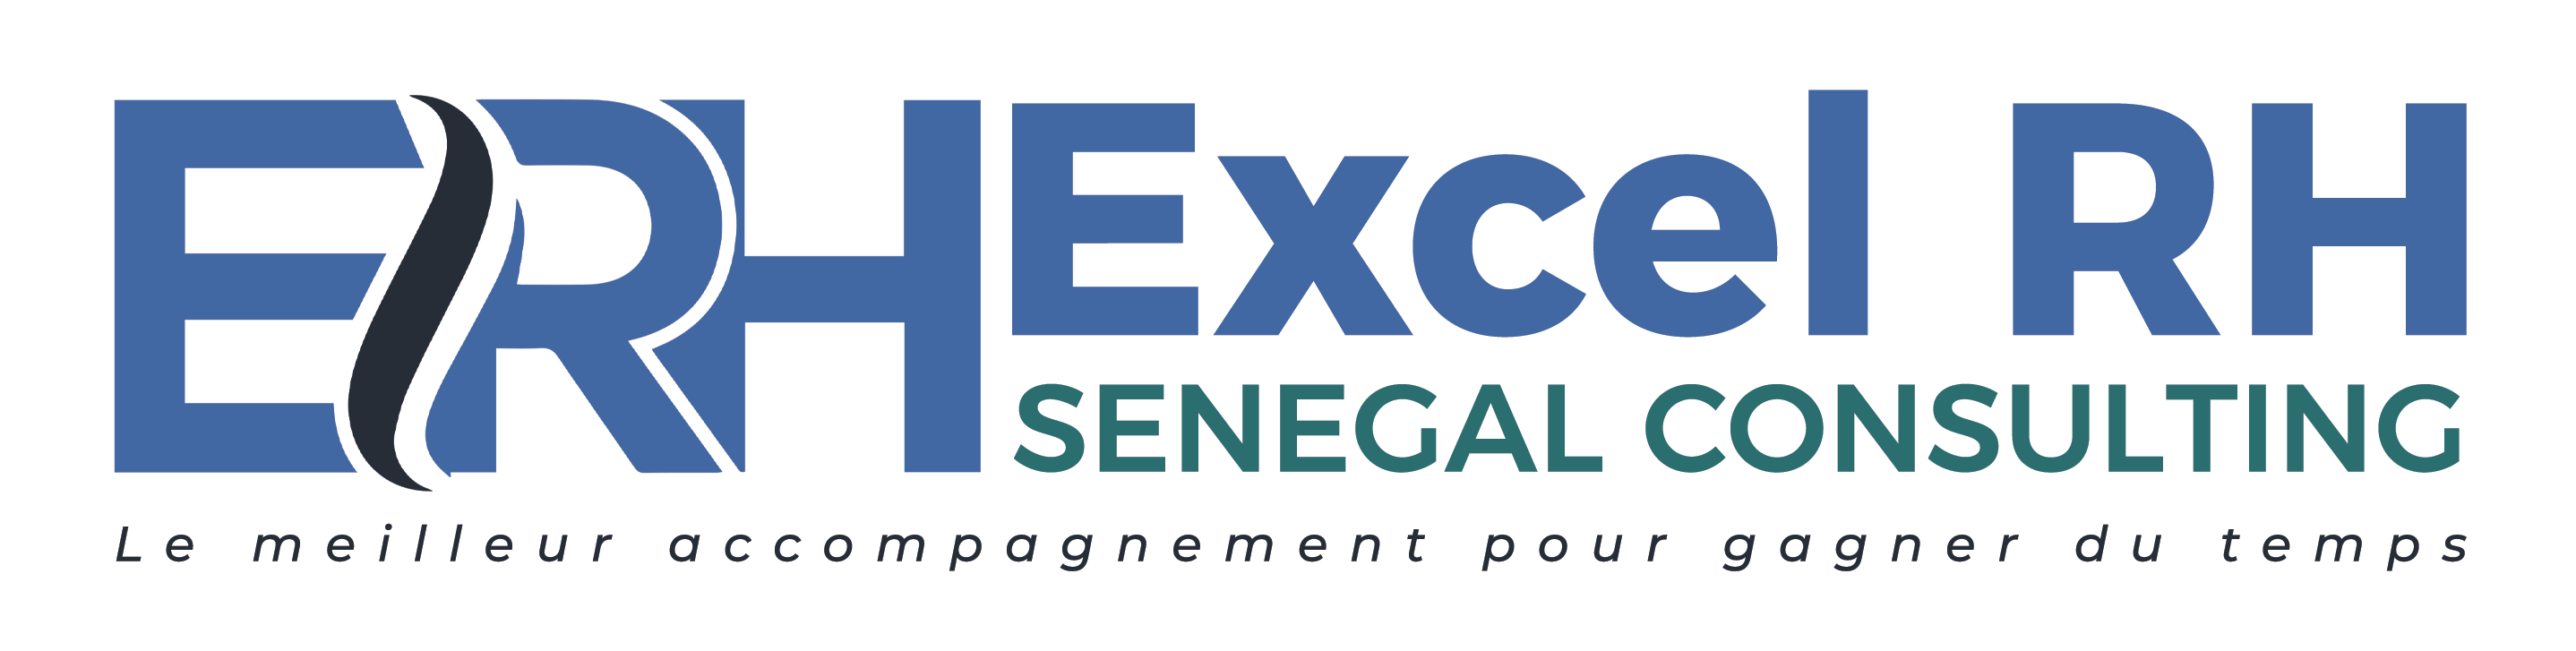 Excellence RH Senegal Consulting